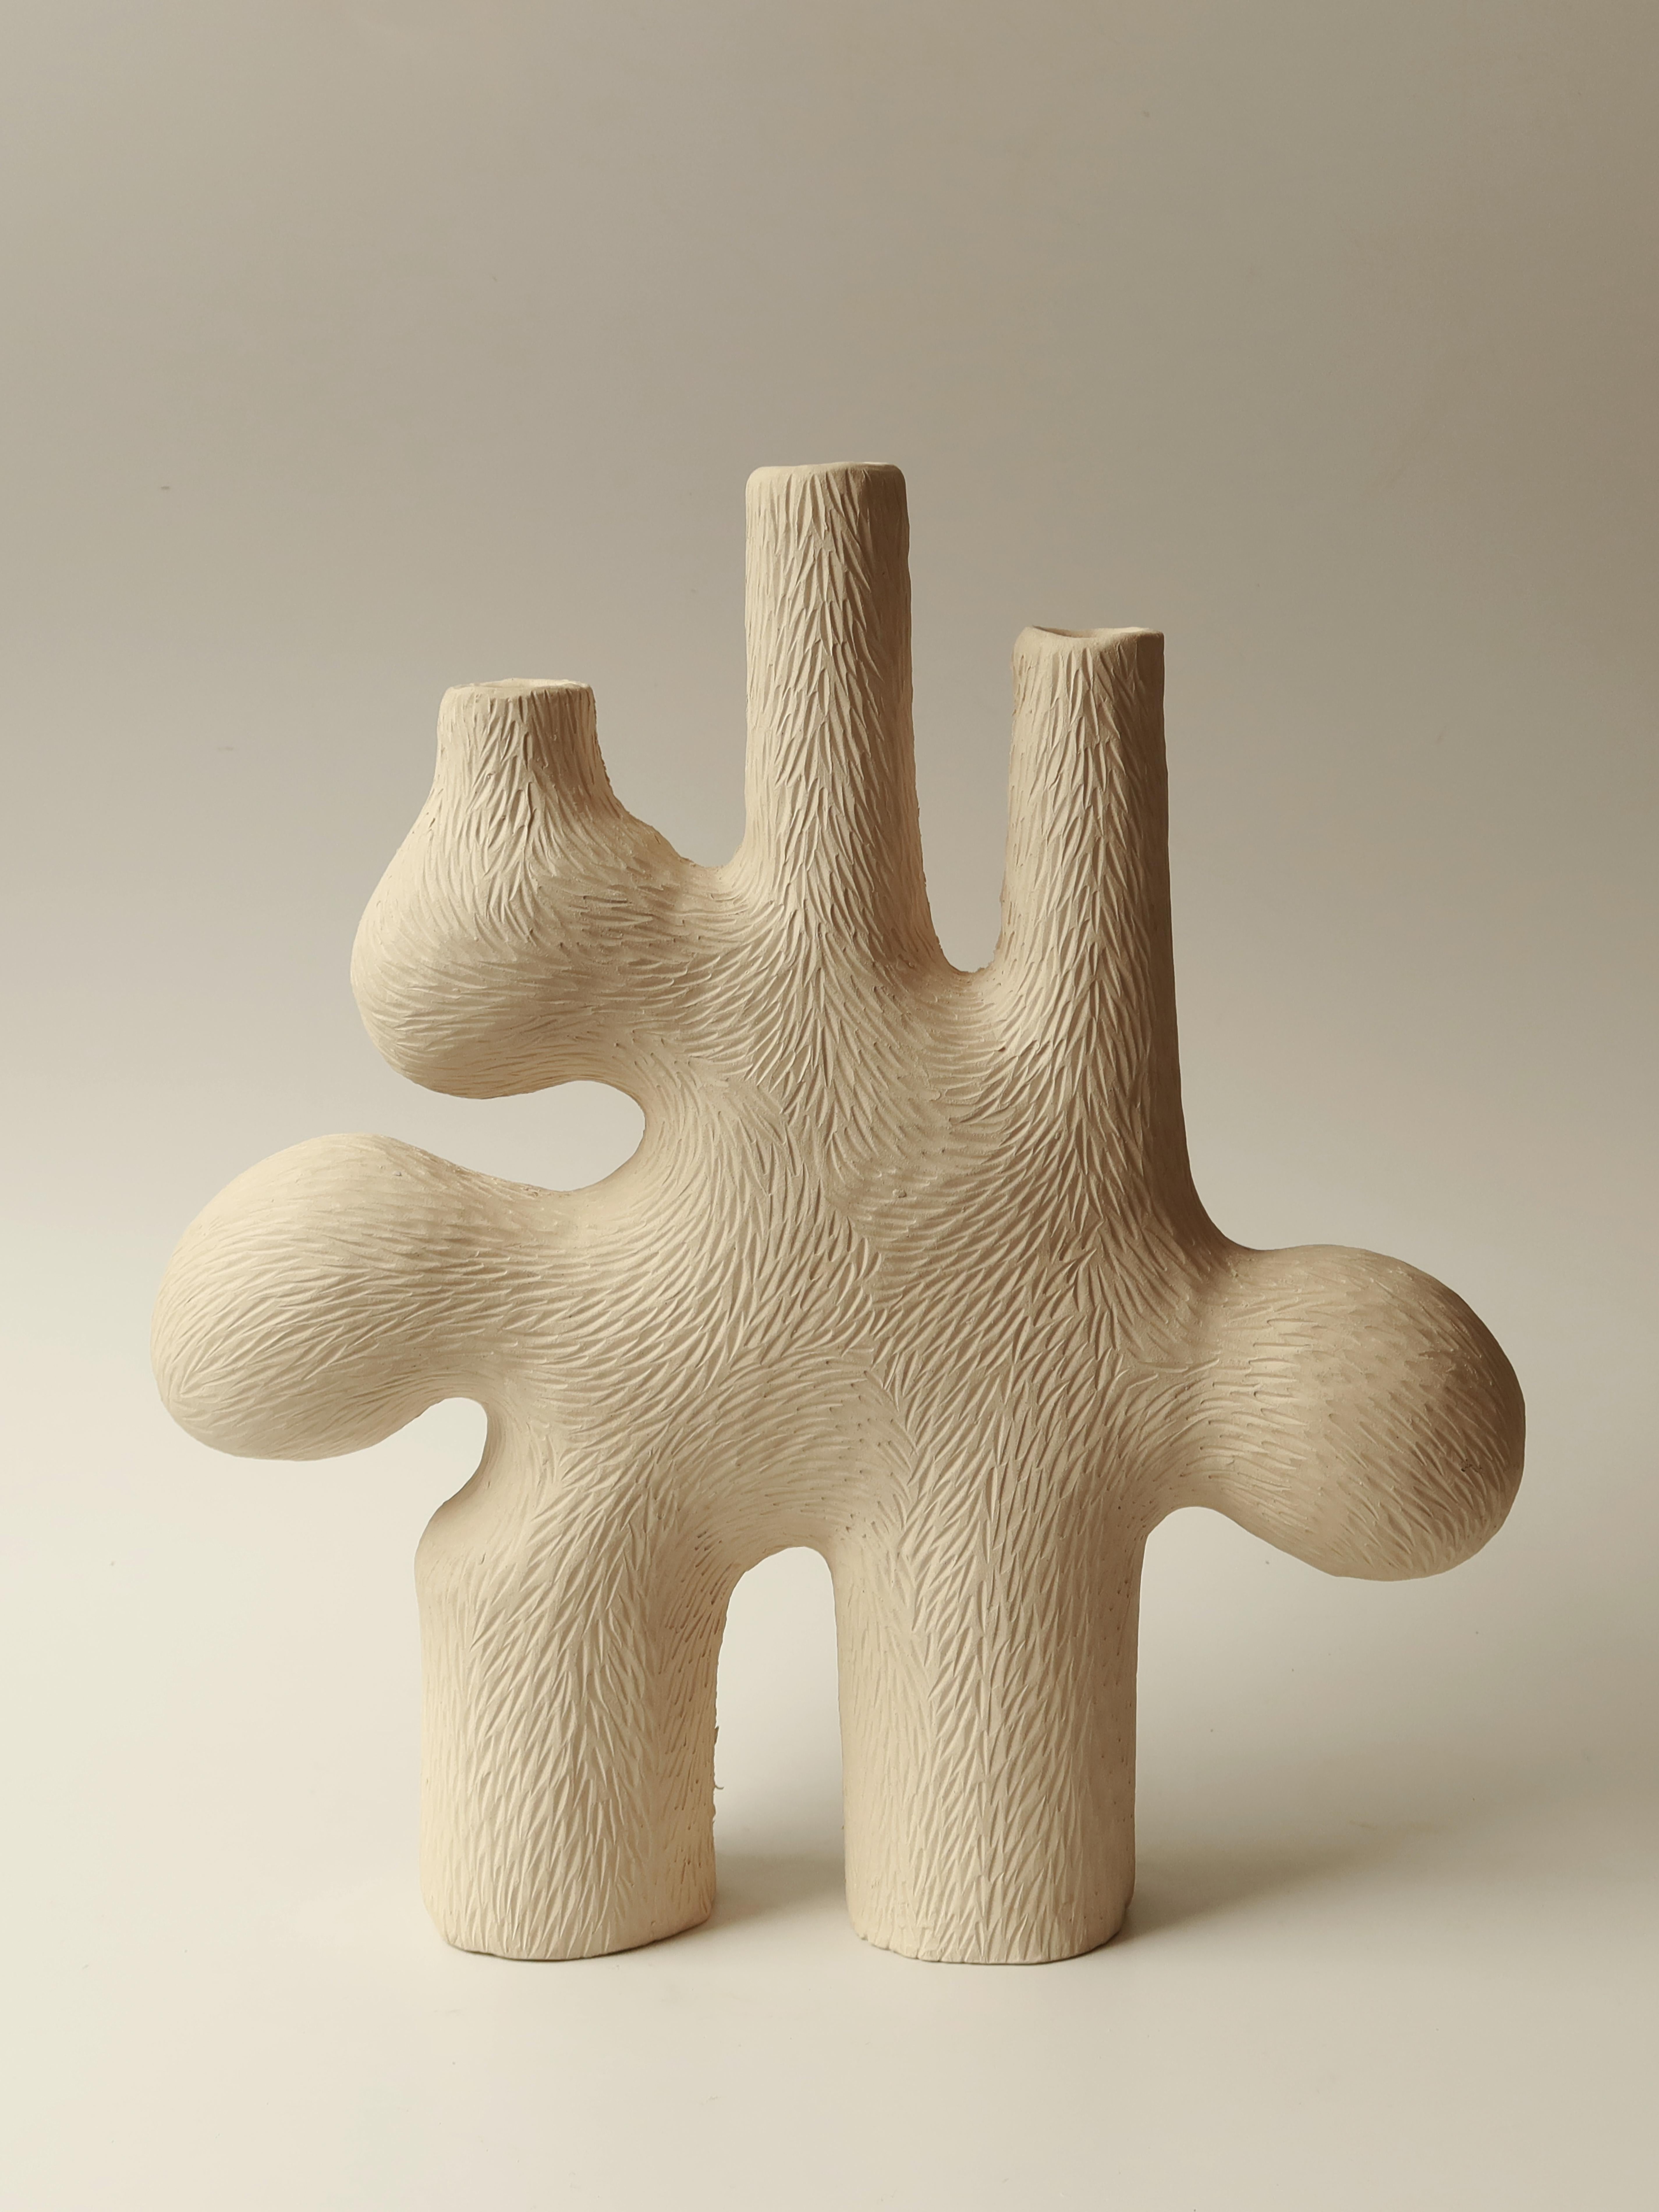 Forest candelabra no.3 by Jan Ernst
Dimensions: W 40 x D 10 x H 42 cm
Materials: White stoneware, Black clay, Terracotta

Glazed to client specification.


Jan Ernst’s work takes on an experimental approach, as he prefers making bespoke